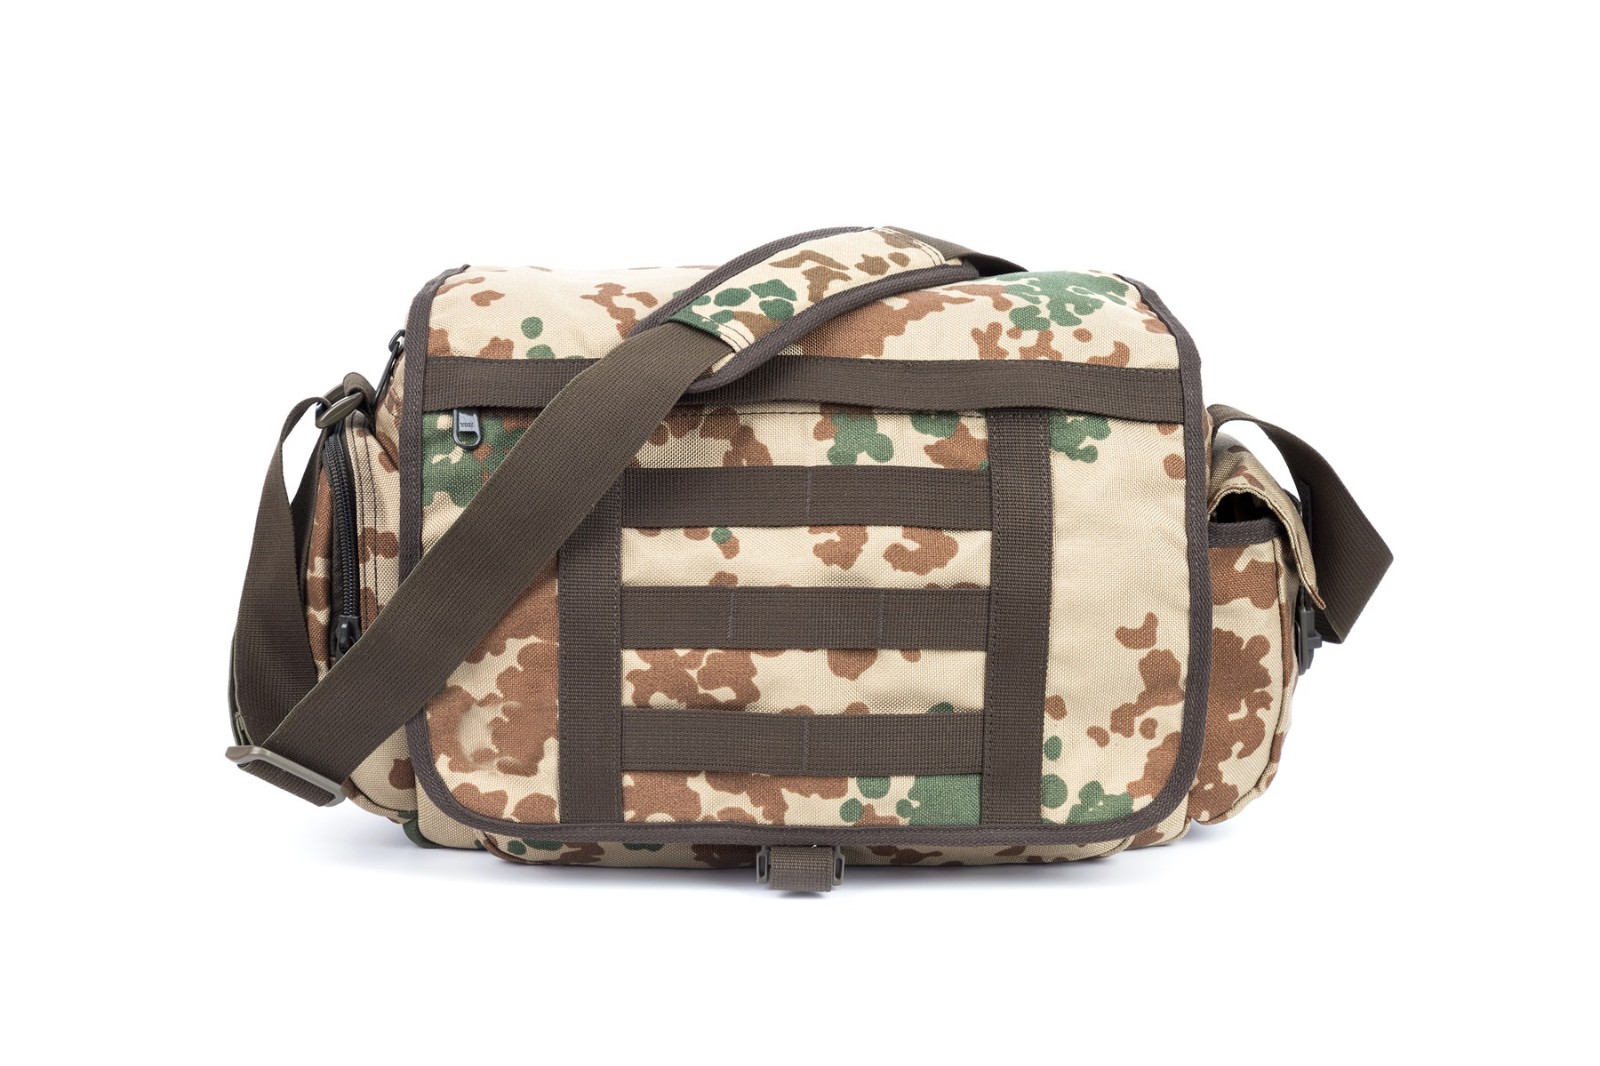 GF bags-Find Military Gear Bags Military Messenger Bag From GF Bags-4